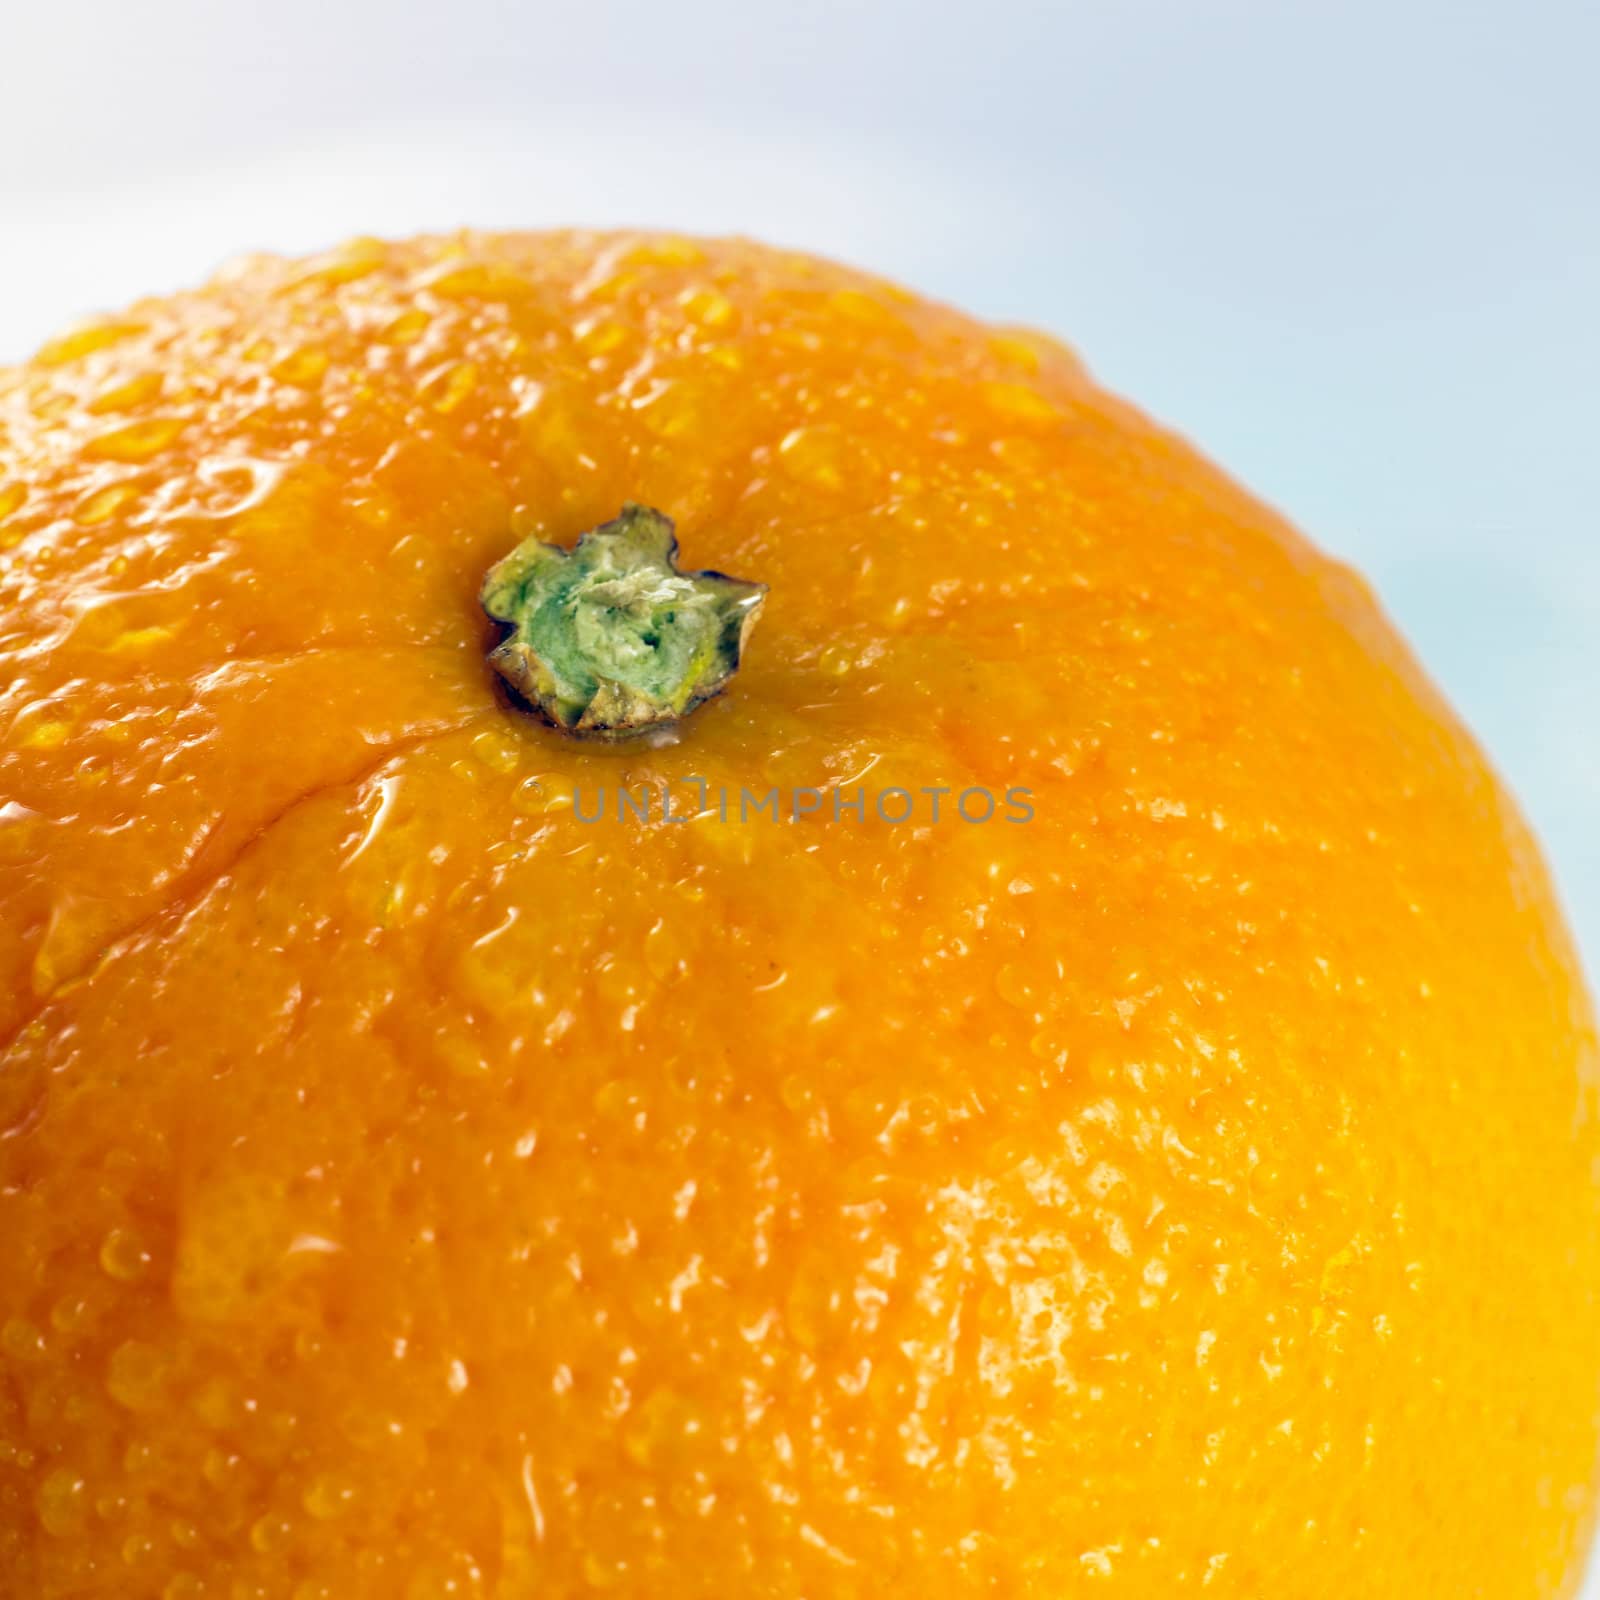 close-up of an orange isolated on a white background